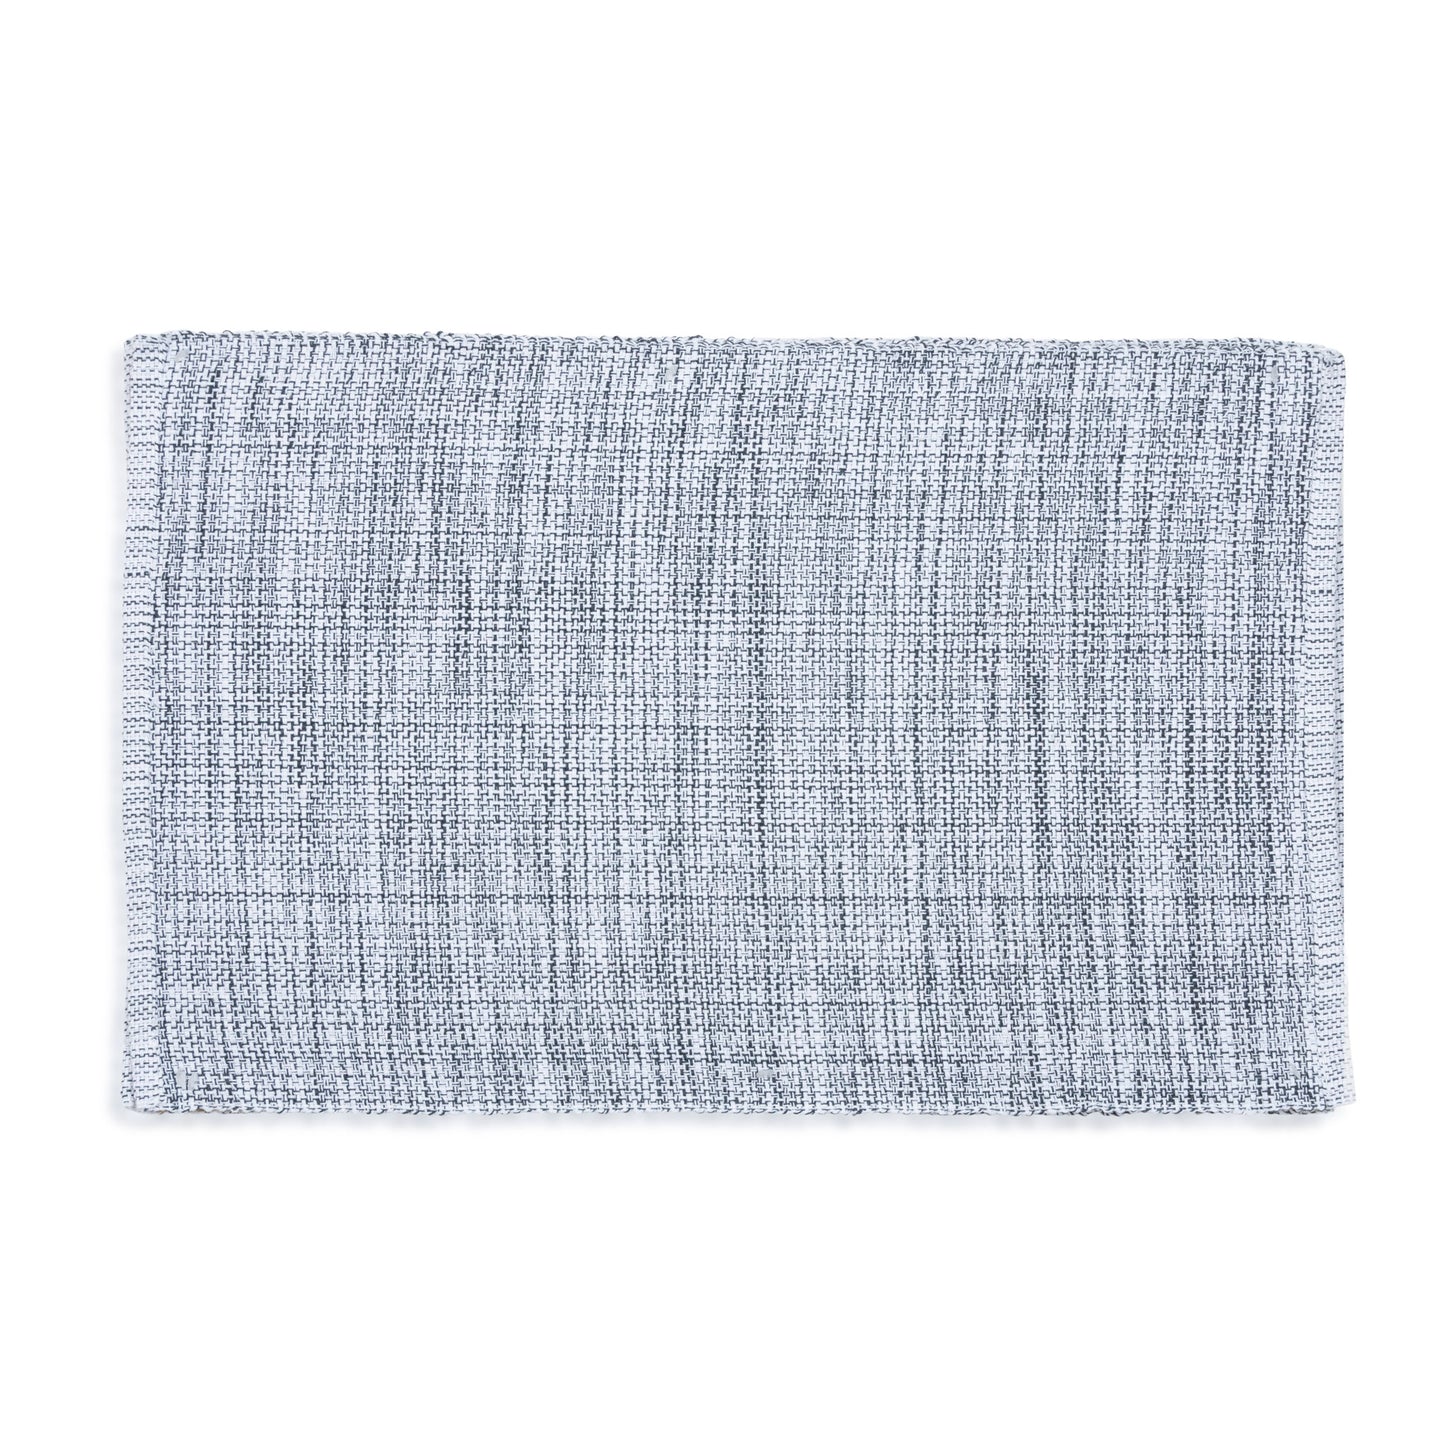 Gray Textured Woven Dining Room Table Placemat